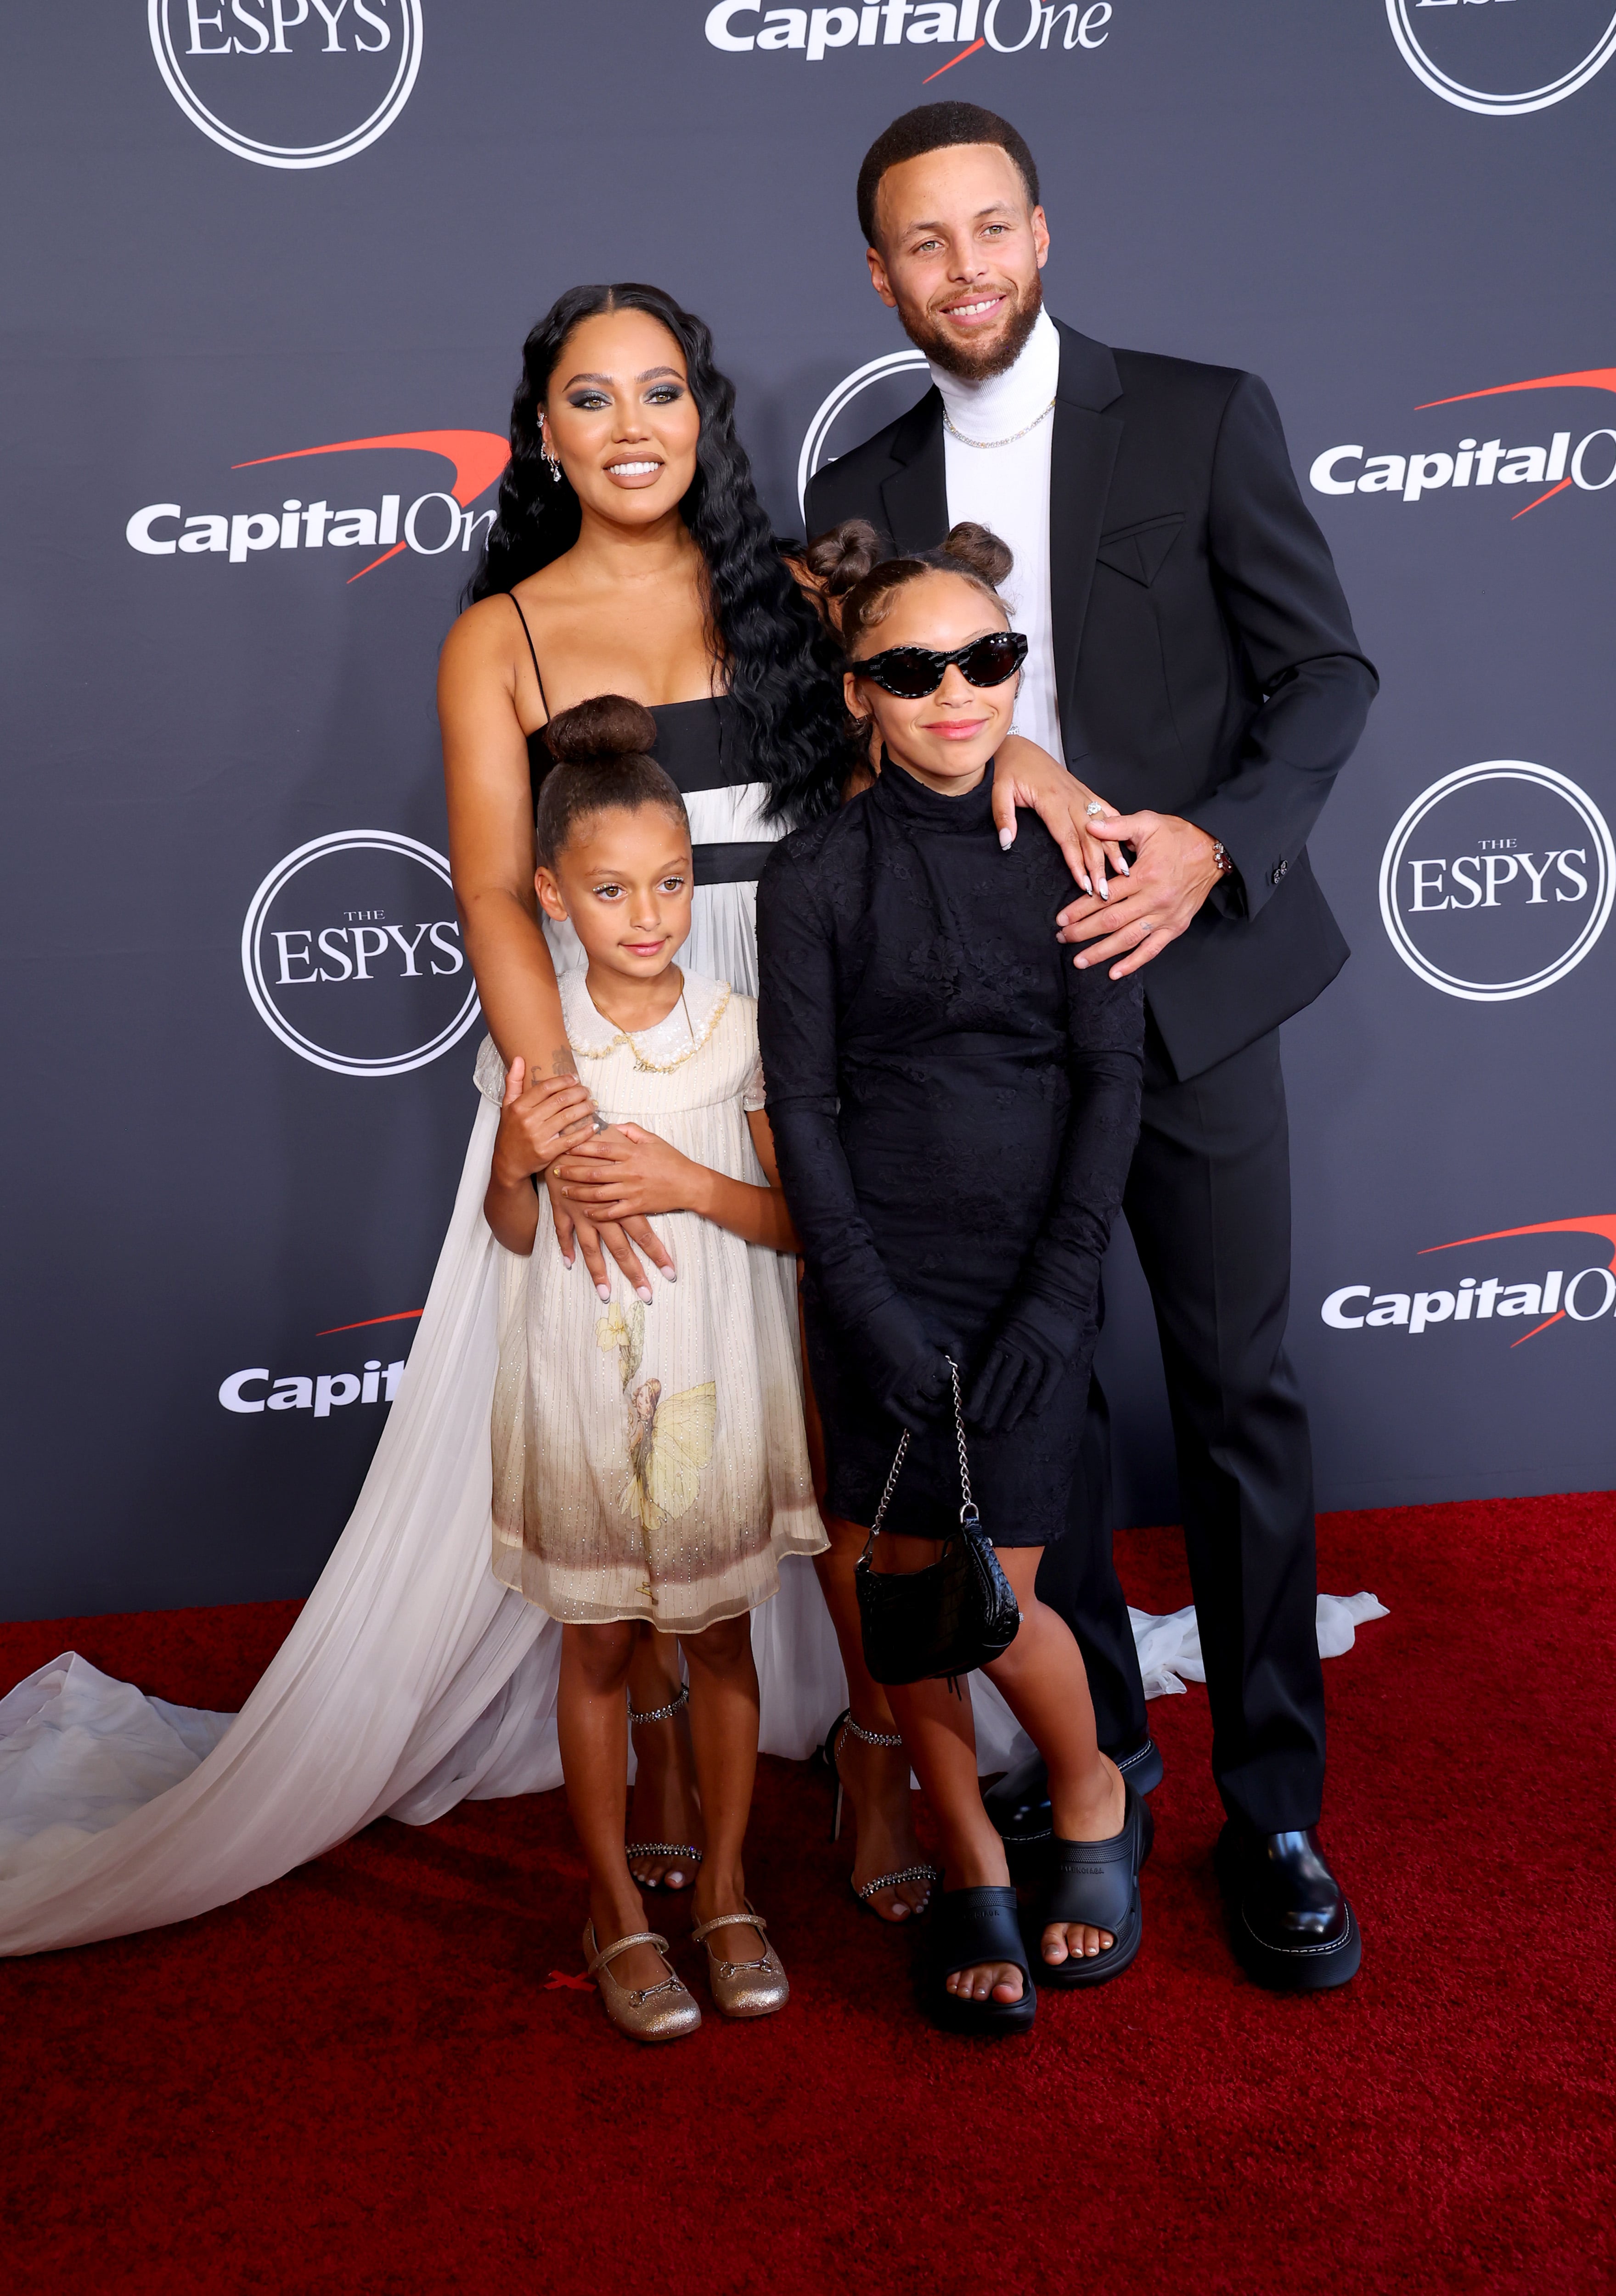 Ayesha Curry At ESPYS 2022: See Her Dress & Steph's Outfit: Photo